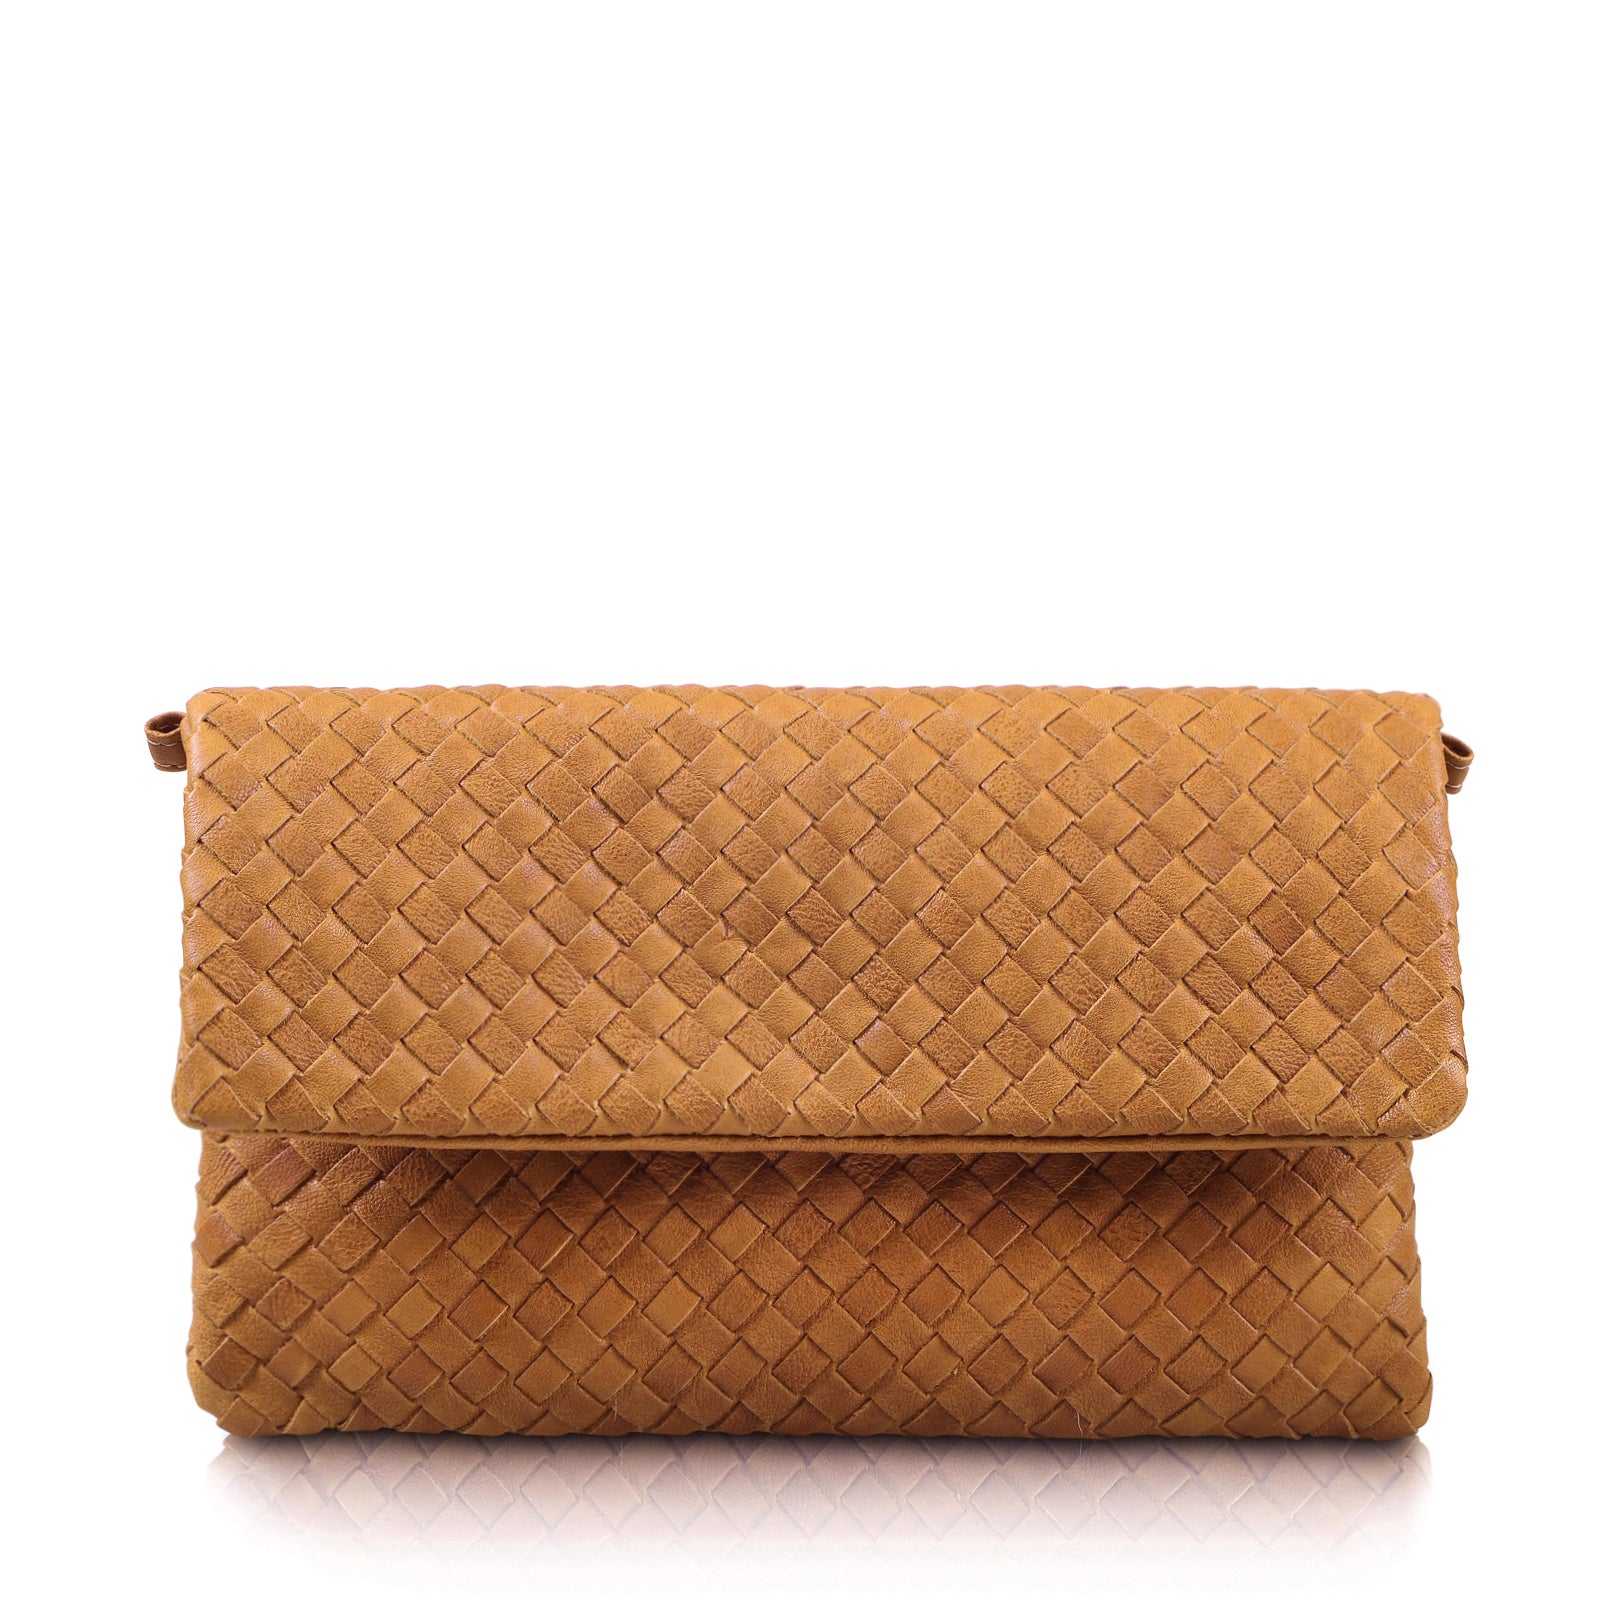 The Julia Woven Leather Clutch Bag - MILANER